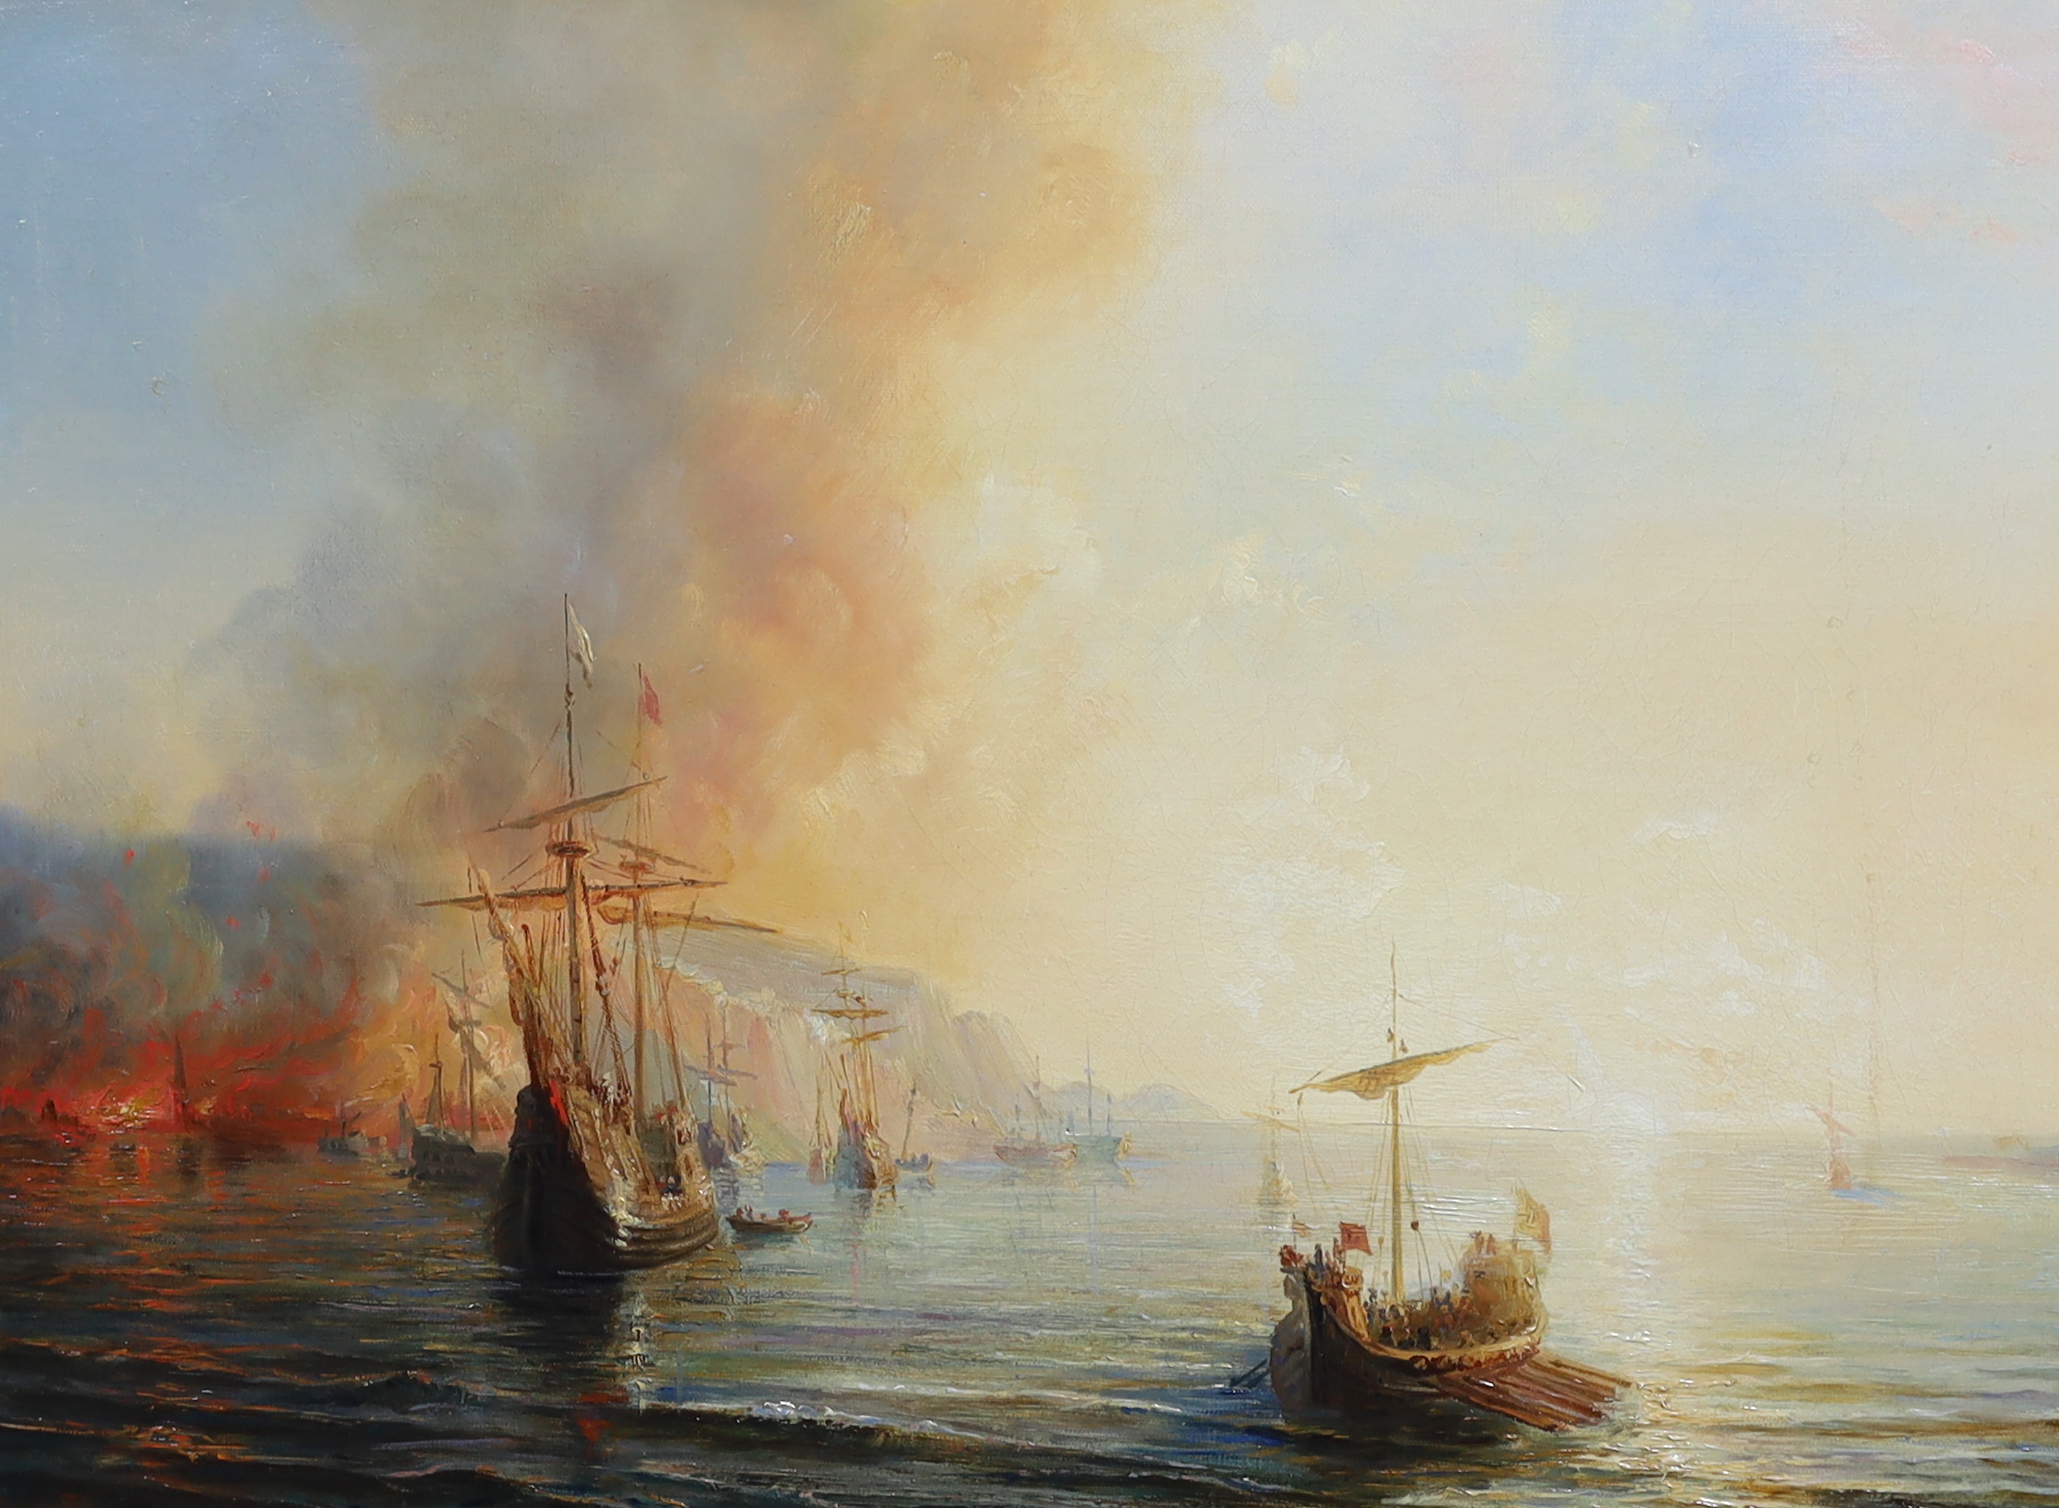 Henriette Hermione Gudin (French, 1825-1876), Fire on the coast, oil on canvas, 36 x 48cm